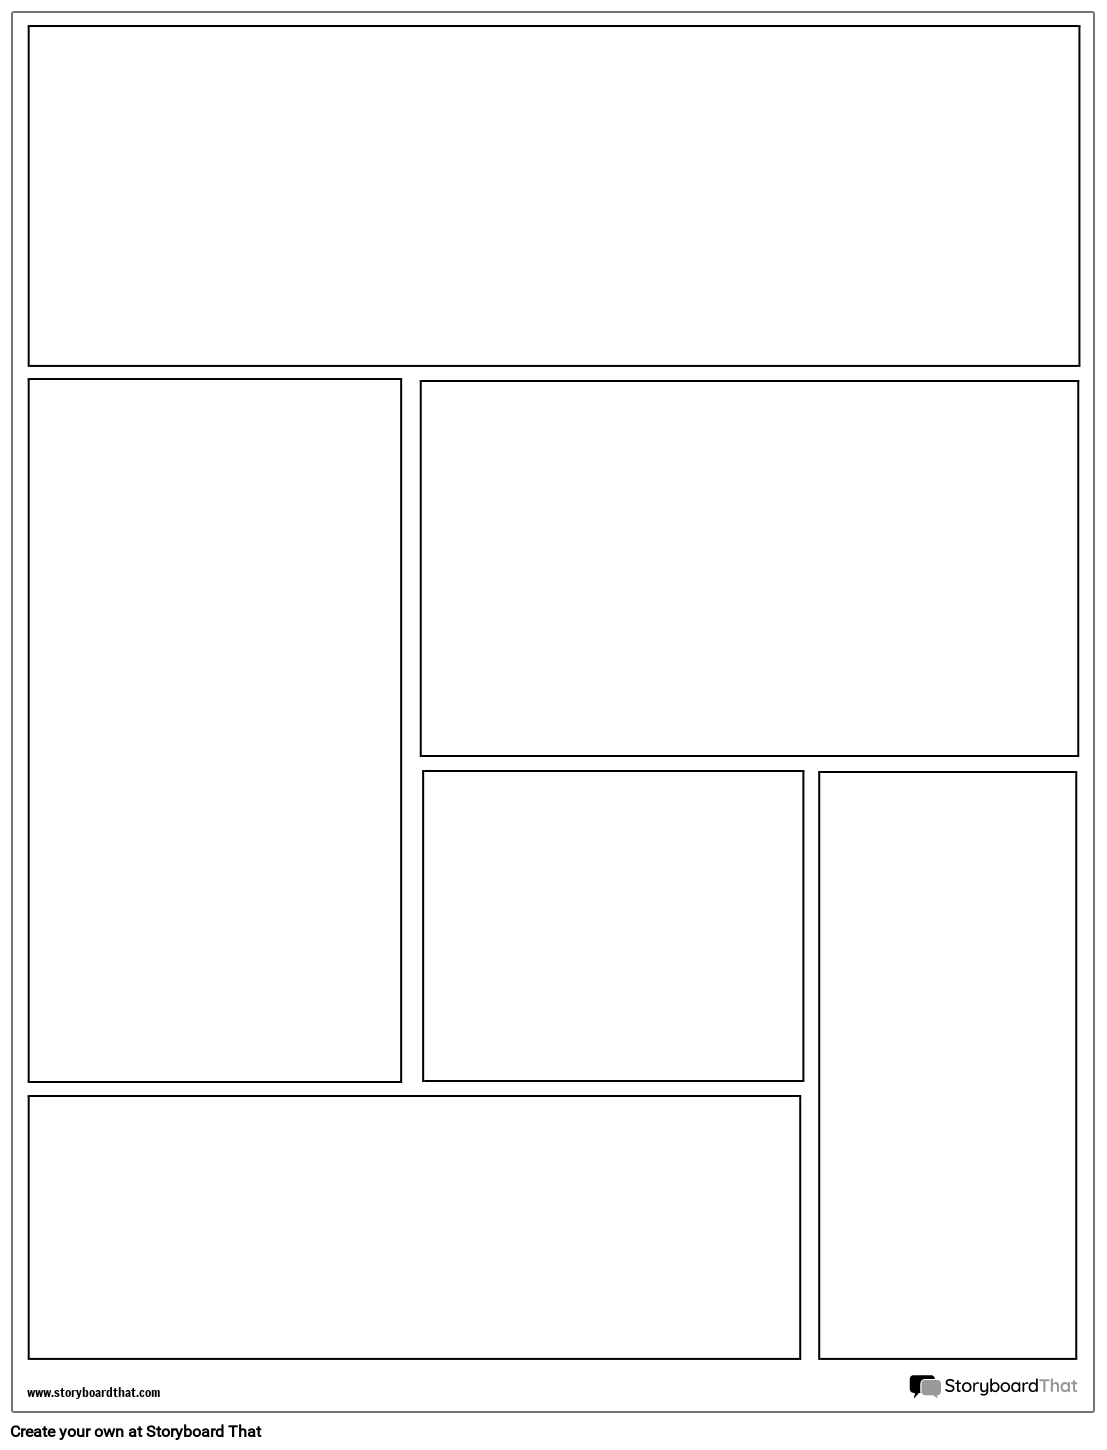 GN Layout Grid of 6 Rectangles and Squares